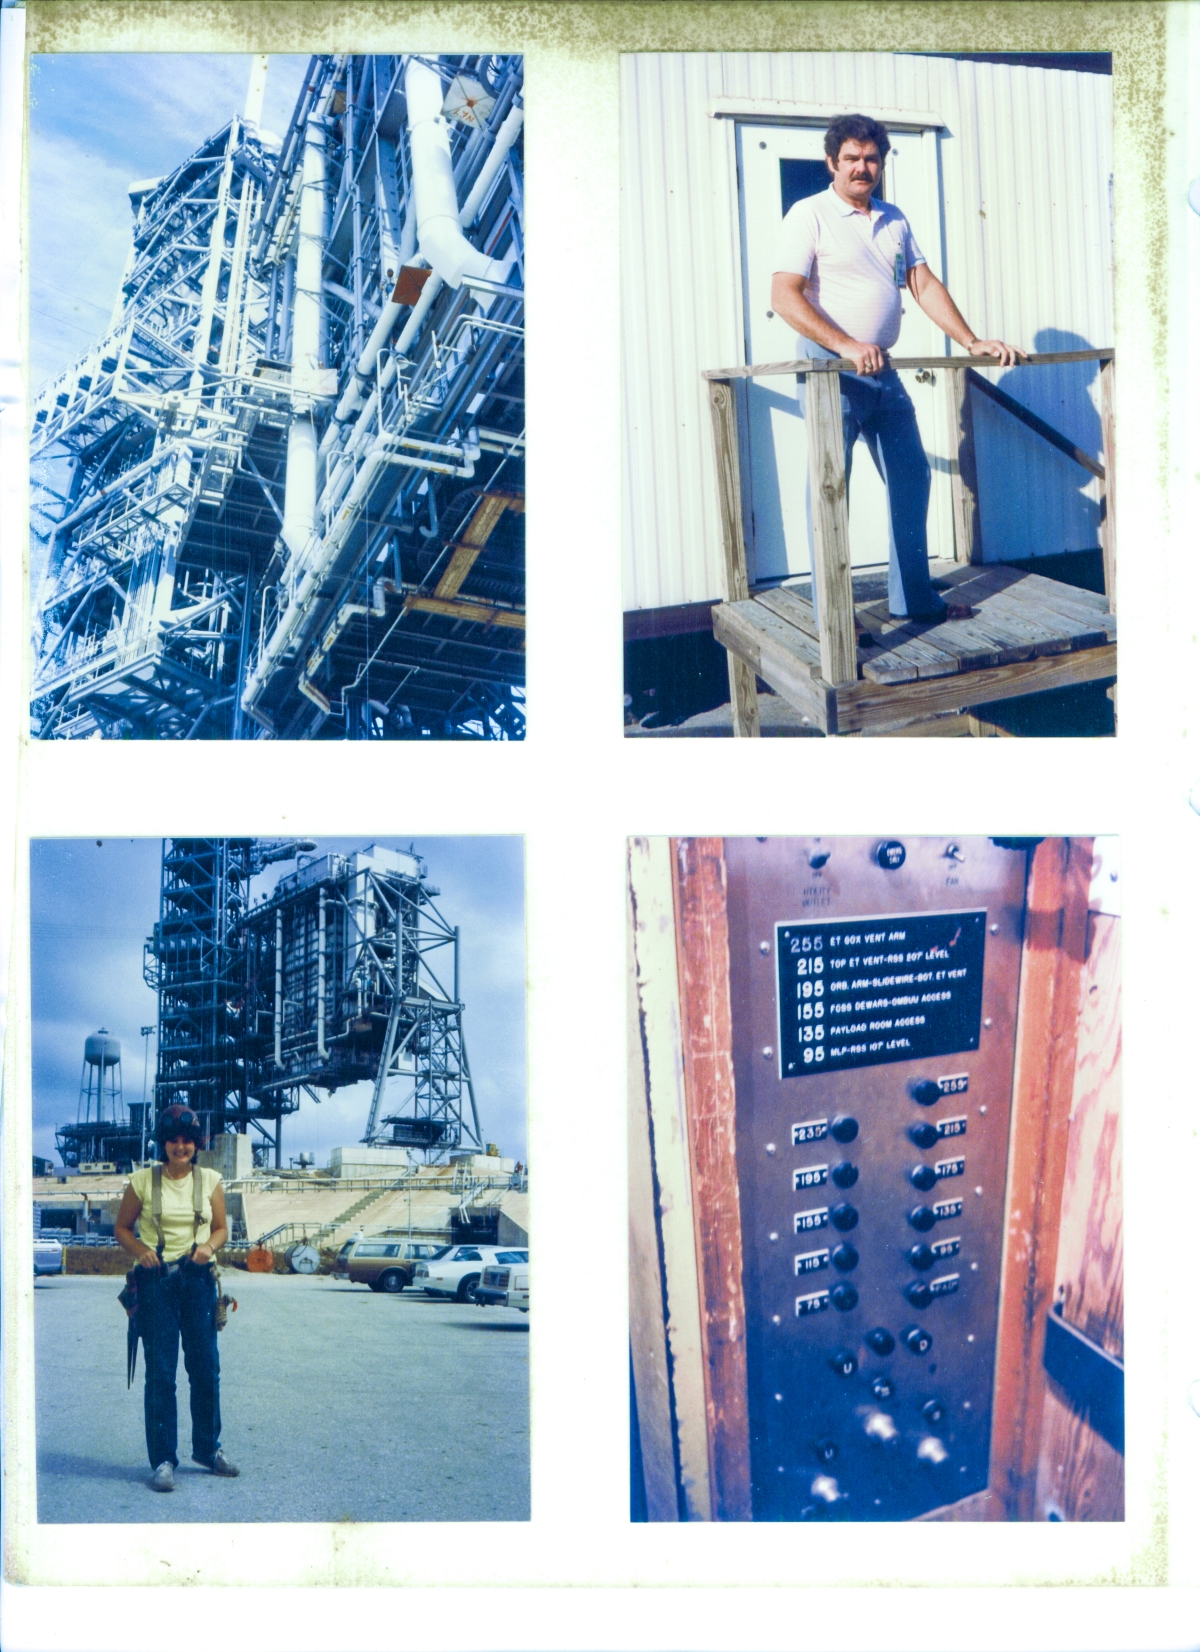 At Space Shuttle Launch Complex 39-B, Kennedy Space Center, Florida, clockwise from top left: Back of the towers. Jack Petty. FSS elevator buttons. Tammy Ivey.